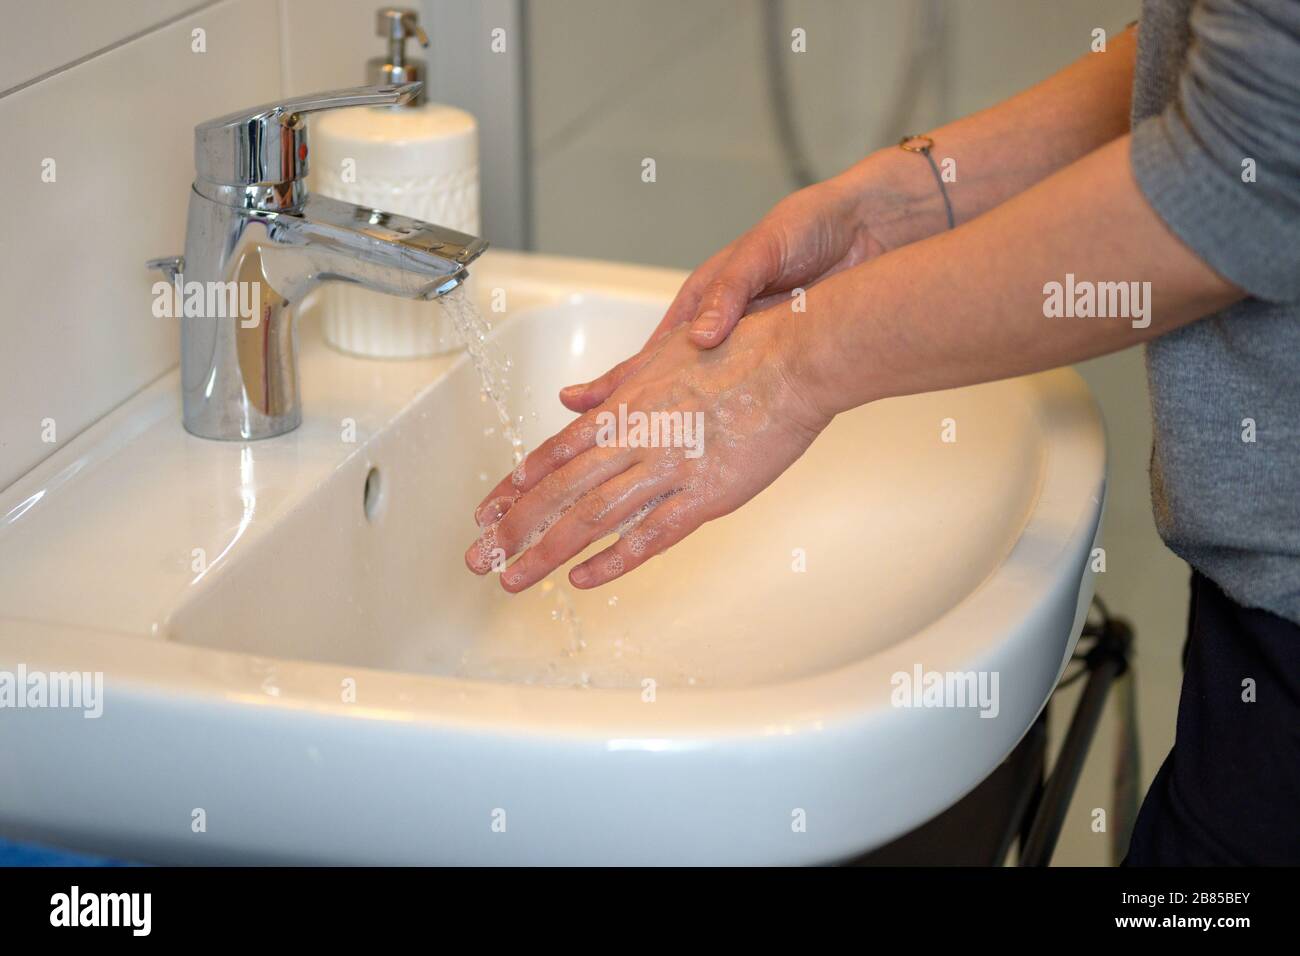 Woman washing her hands under running water over a hand basin in a bathroom in a personal hygiene concept Stock Photo